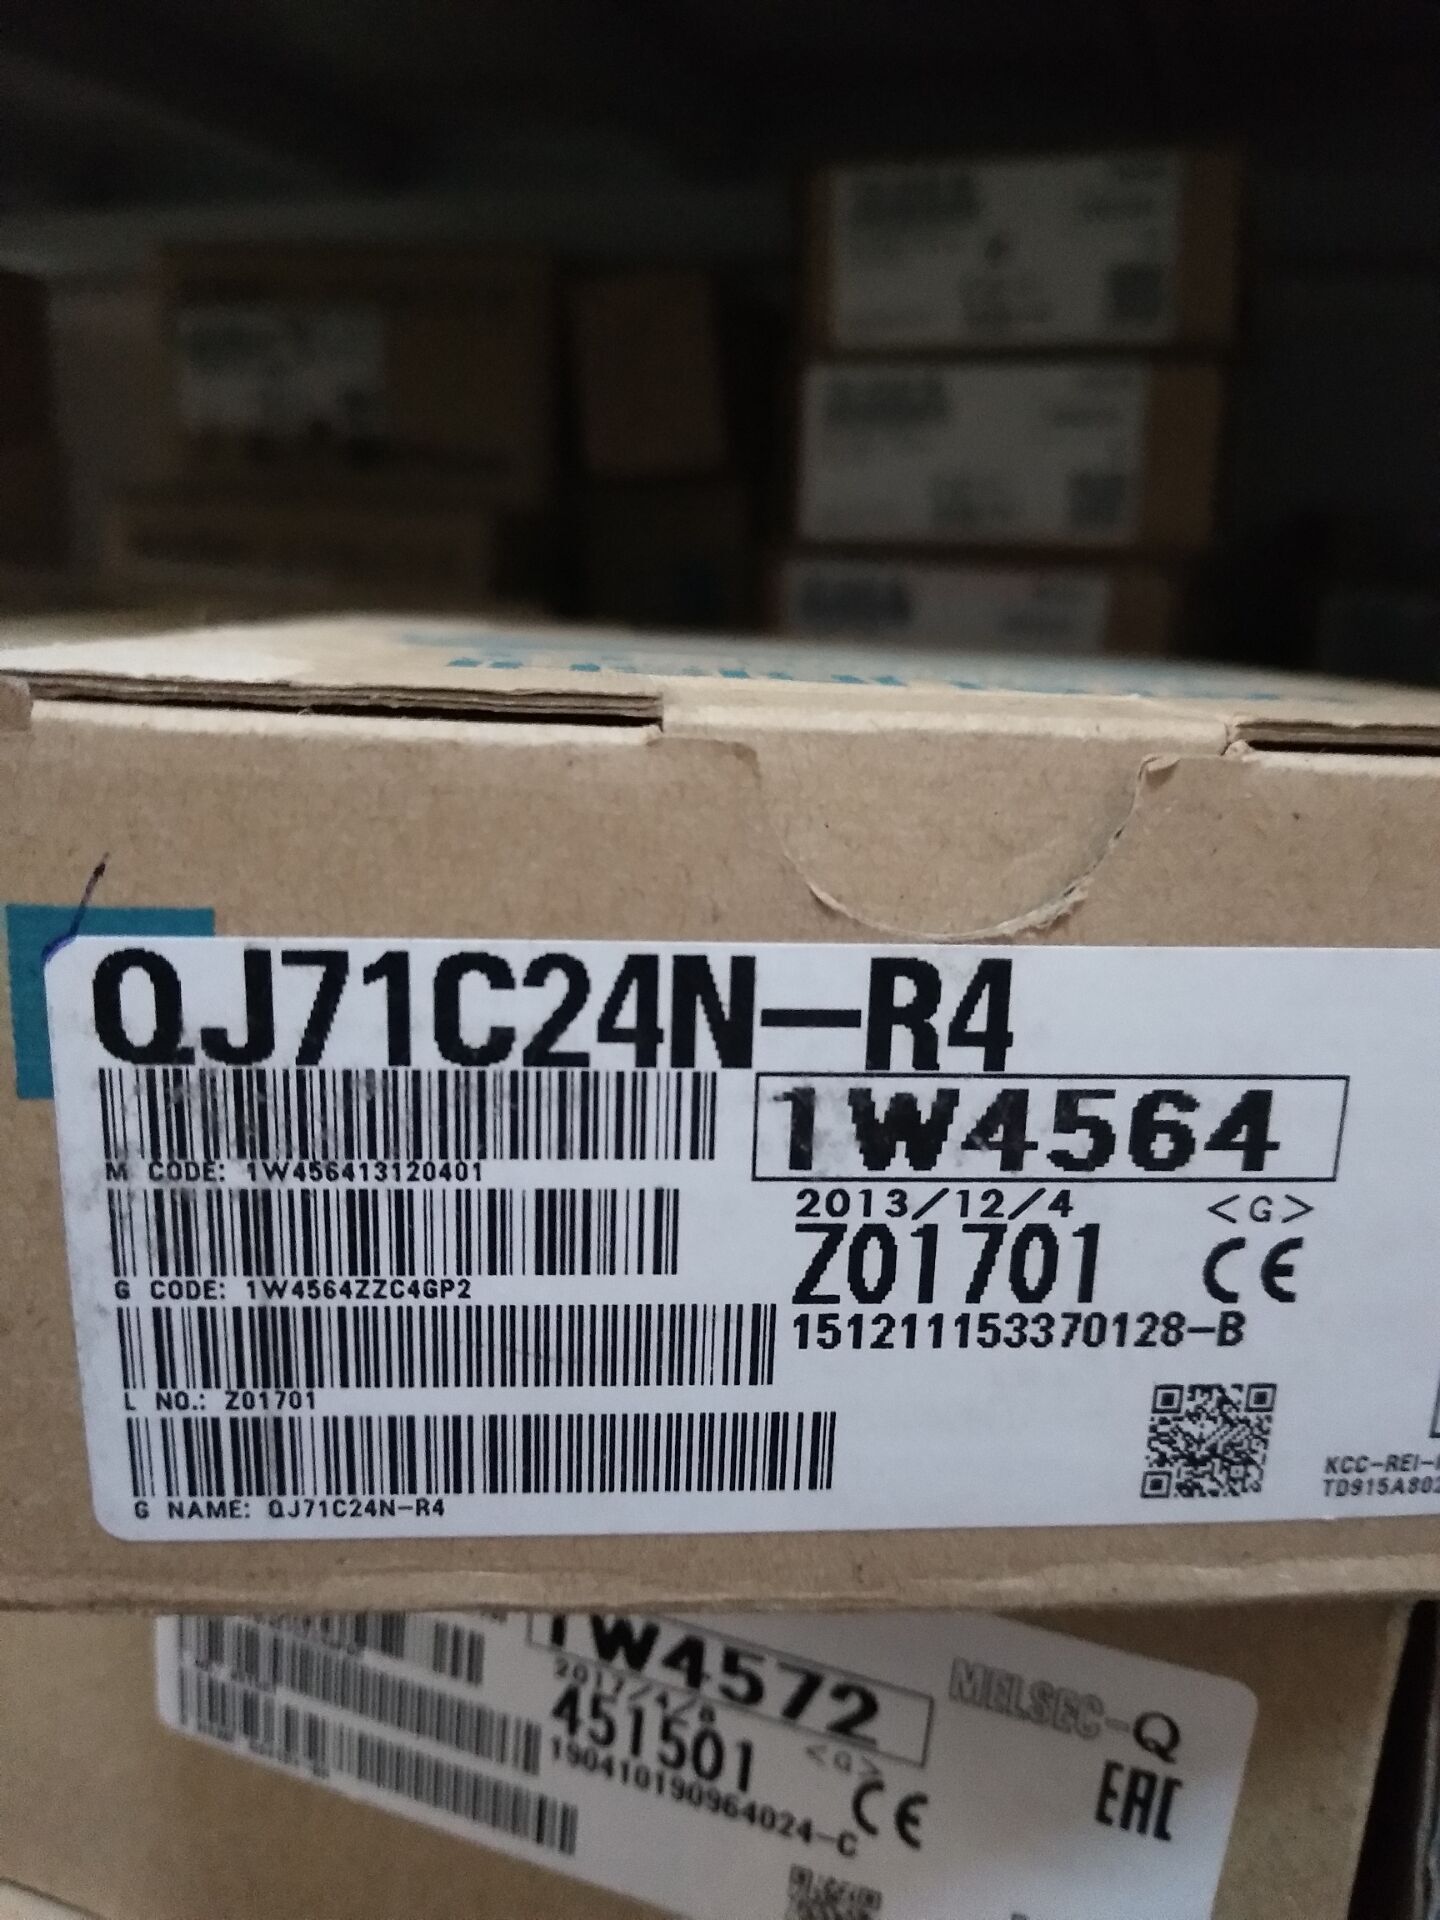 QJ71C24N-R4, Stock, Mitsubishi, PLC Module, New Provide Stock Of  Electronic Components